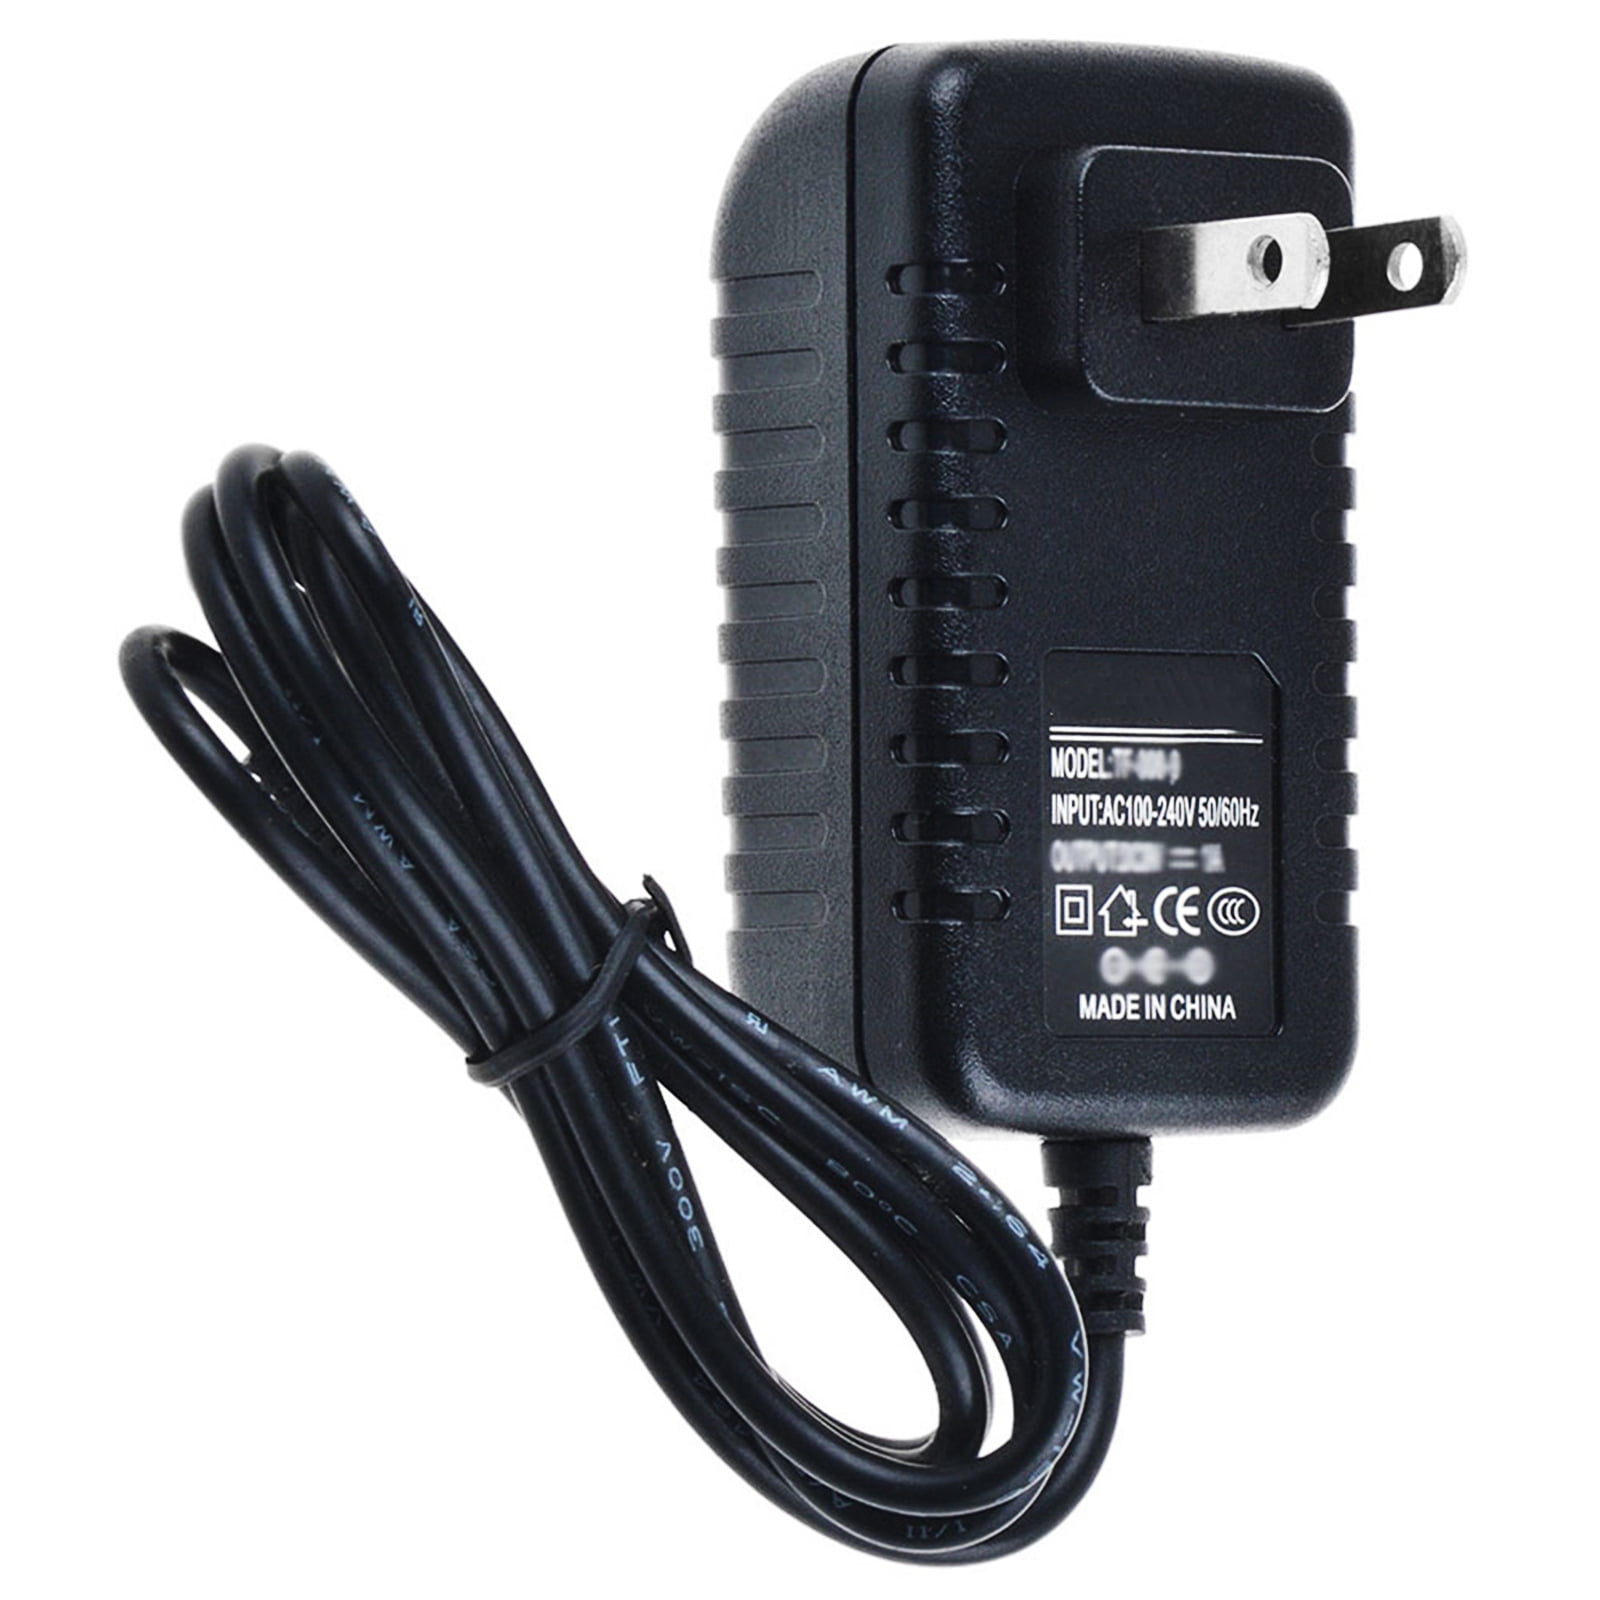 5V 2.5A AC DC Adapter Charger Power Supply For D-Link JTA0302E-E JTA0302E Router 